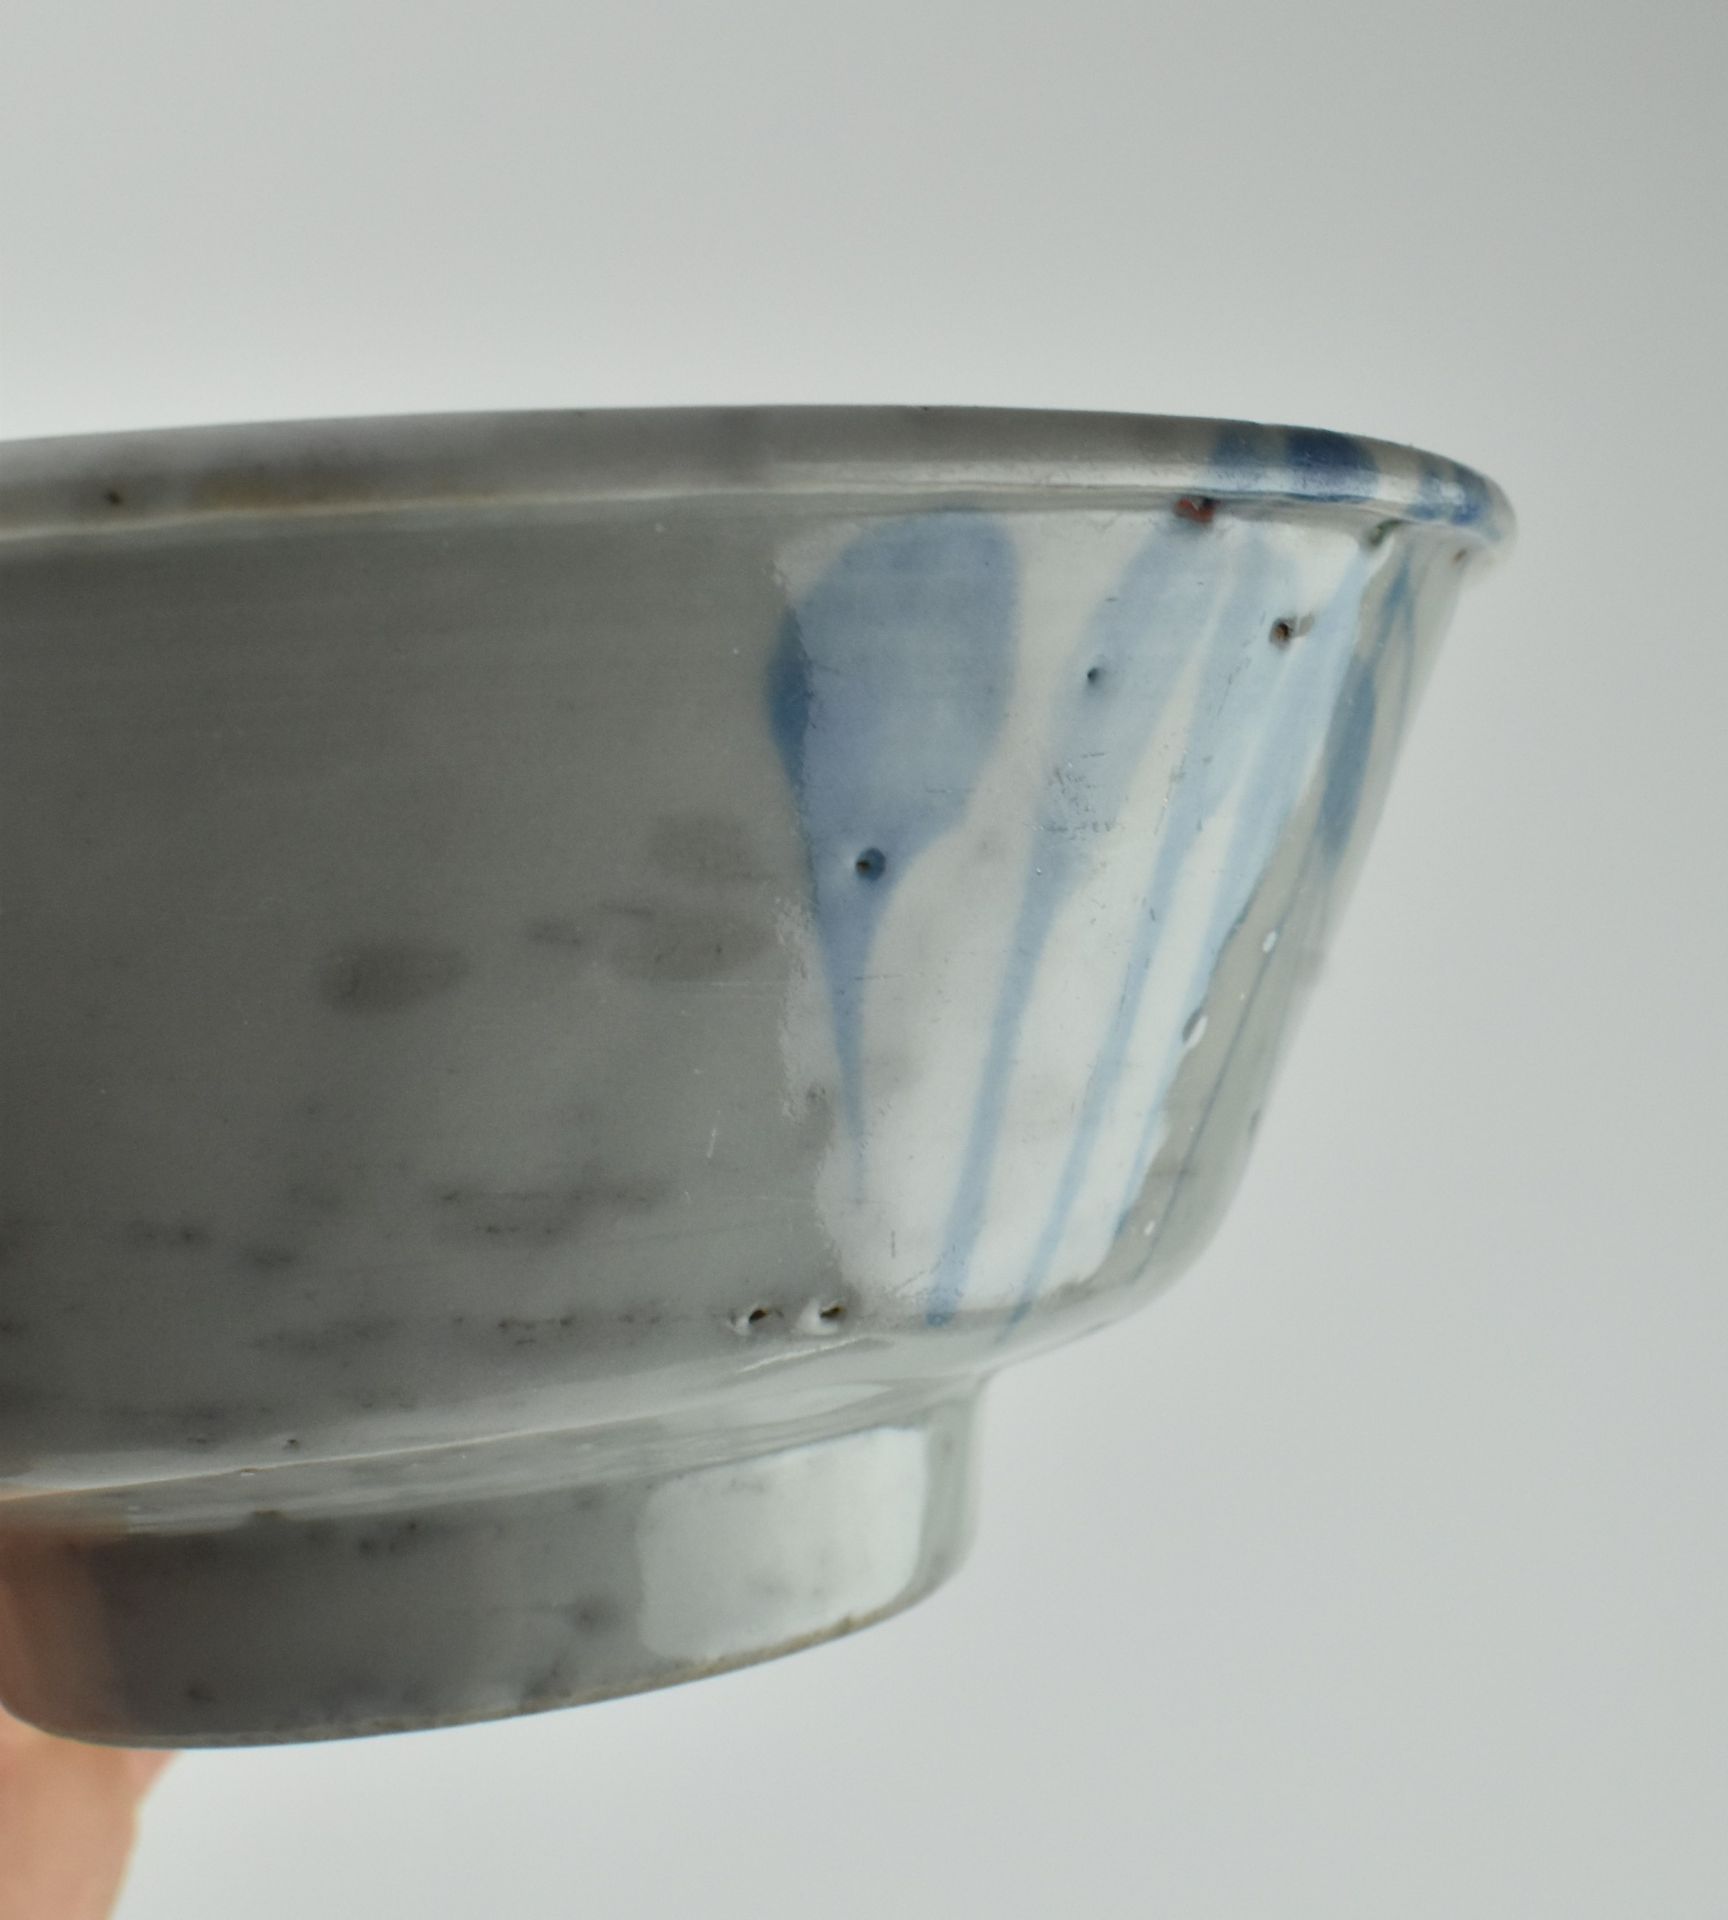 TWO ZHANGZHOU SWATOW WARE BLUE AND WHITE BOWLS 汕头碗两个 - Image 7 of 7